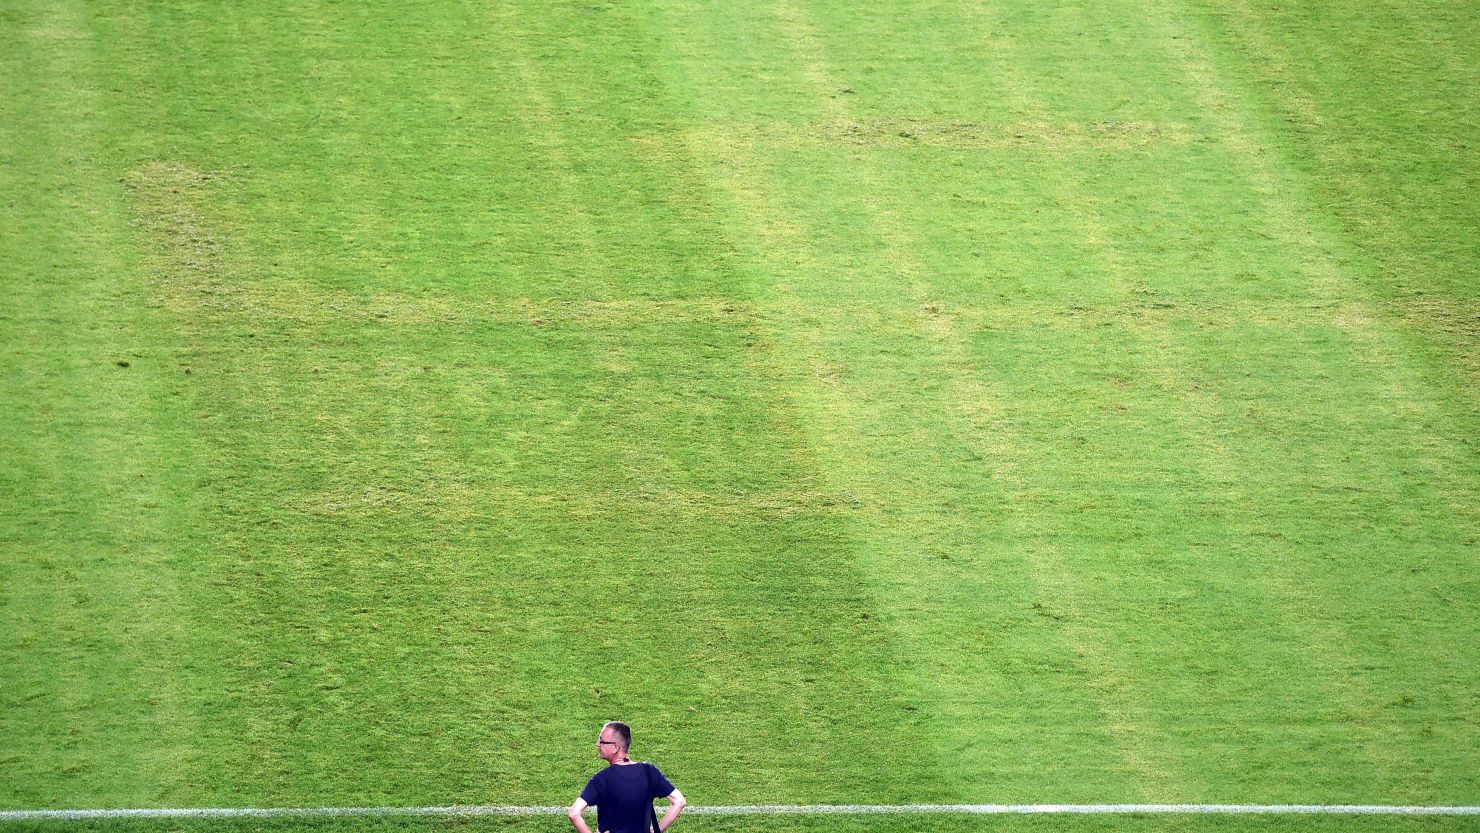 The imprint of a Nazi swastika appeared embedded on the pitch used for Croatia's Euro 2016 home qualifier against Italy.